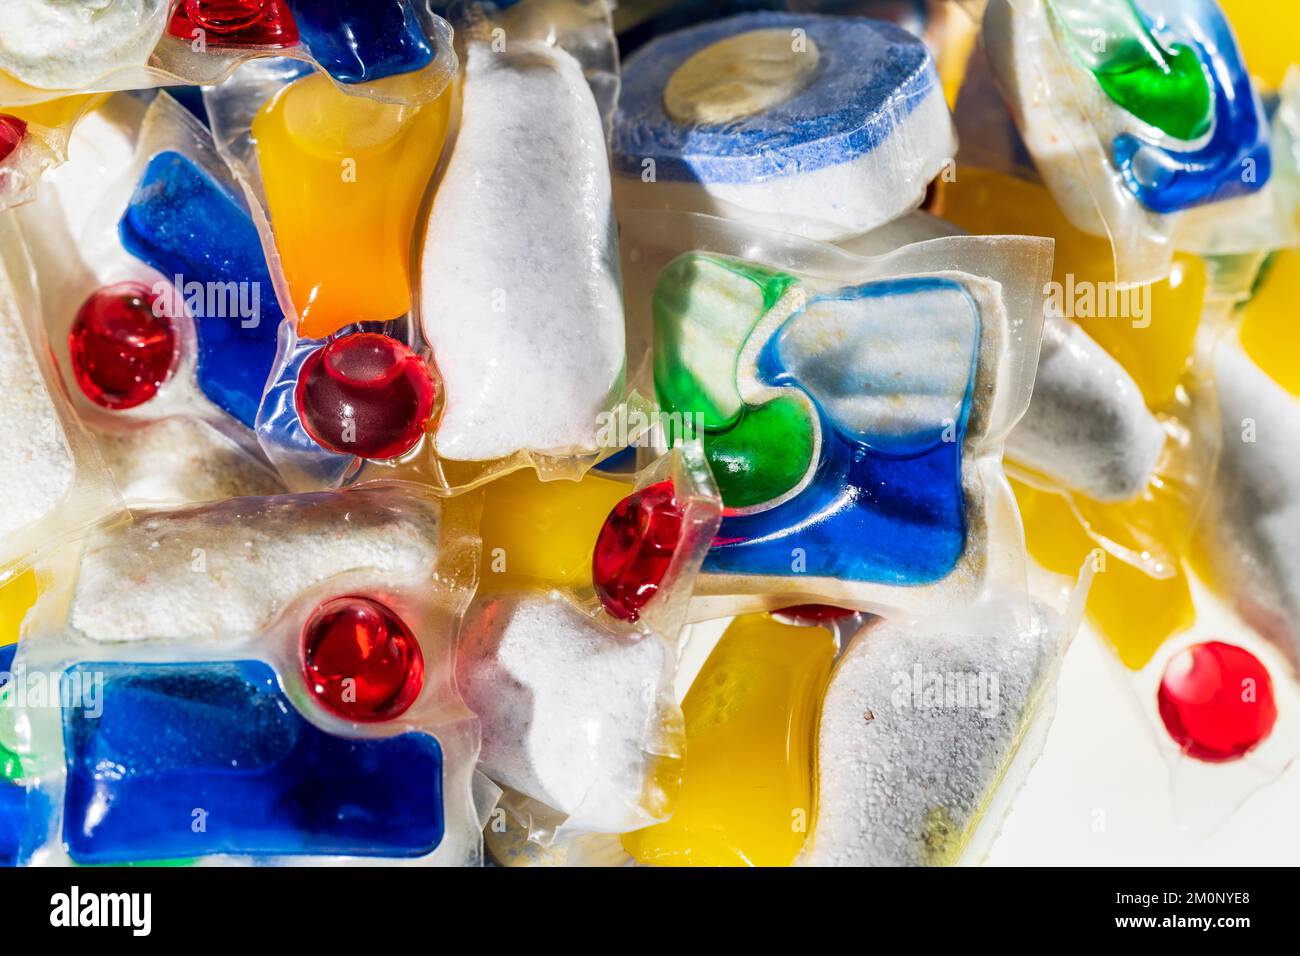 Dishwasher tablets. Close up of various brands, (no brand names showing), of household dishwasher tablets in a pile. Stock Photo